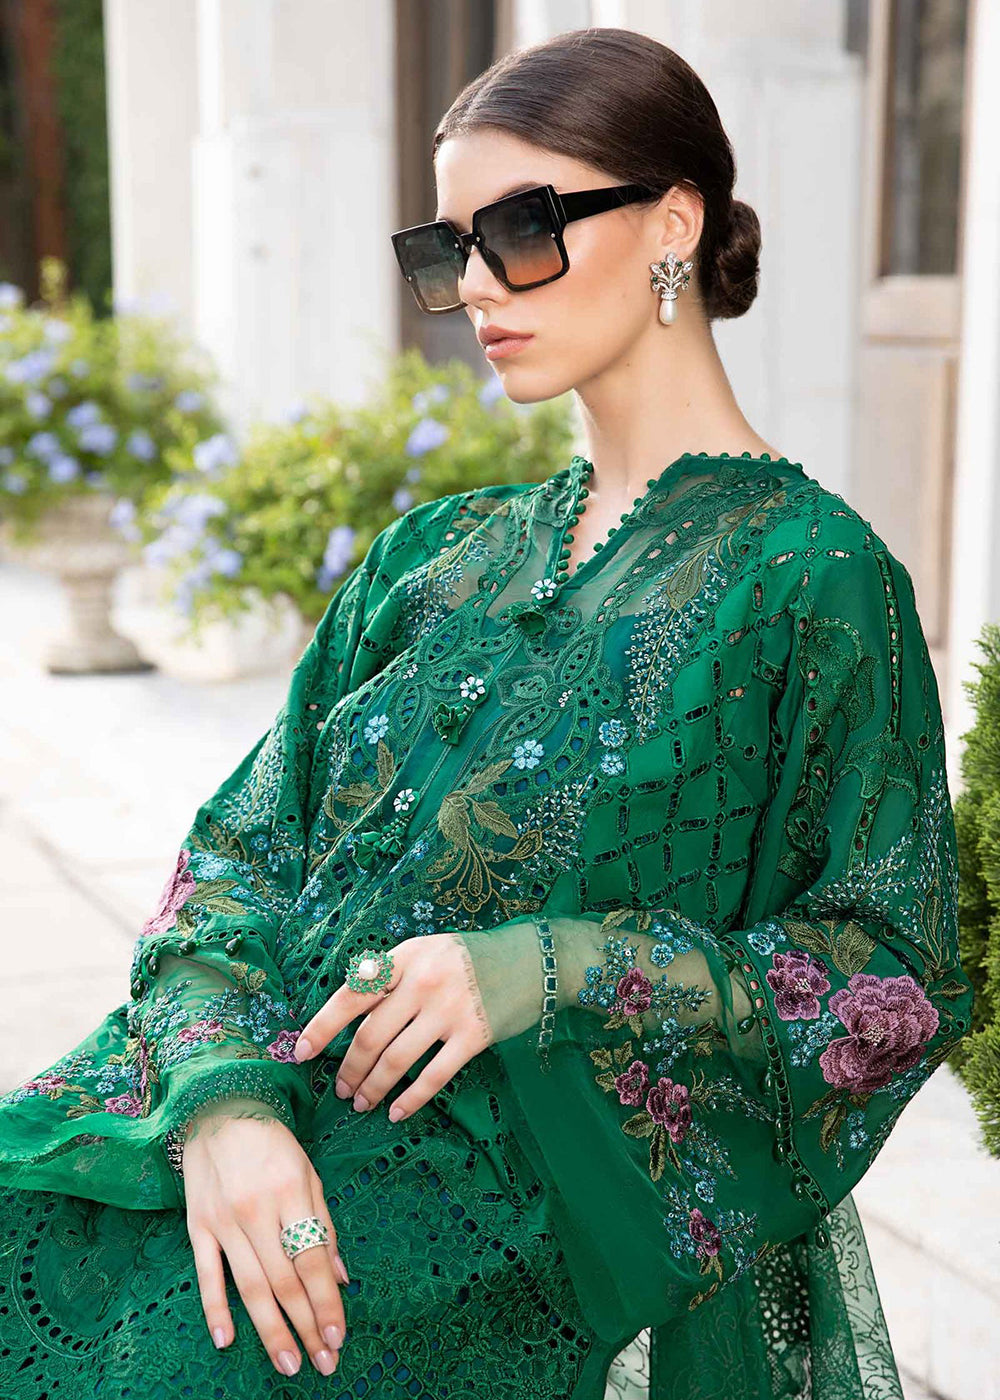 Buy Now Unstitched Luxury Lawn Eid 2 Edition '24 by Maria B | EL-24-02 Online at Empress in USA, UK, Canada, Germany, Italy, Dubai & Worldwide at Empress Clothing.